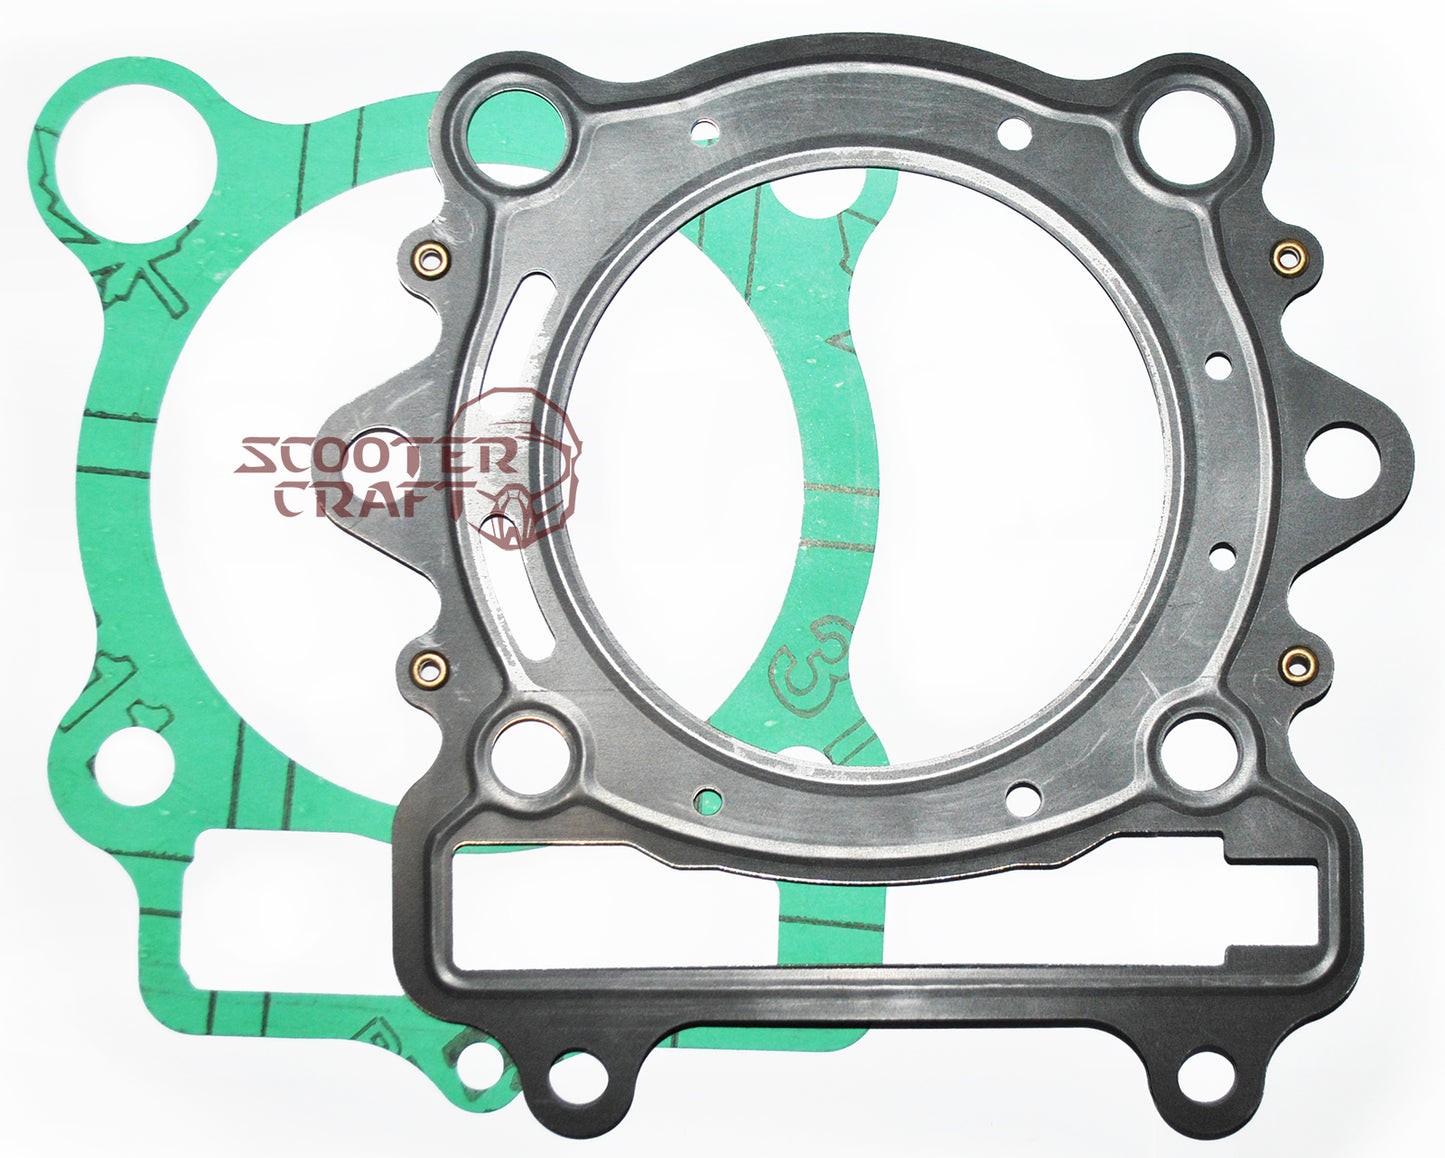 Engine gasket kit Hisun HS400, Forge 400 2015-Up, Tactic 400 2017-Up, Massimo MSU 400, Knight 400